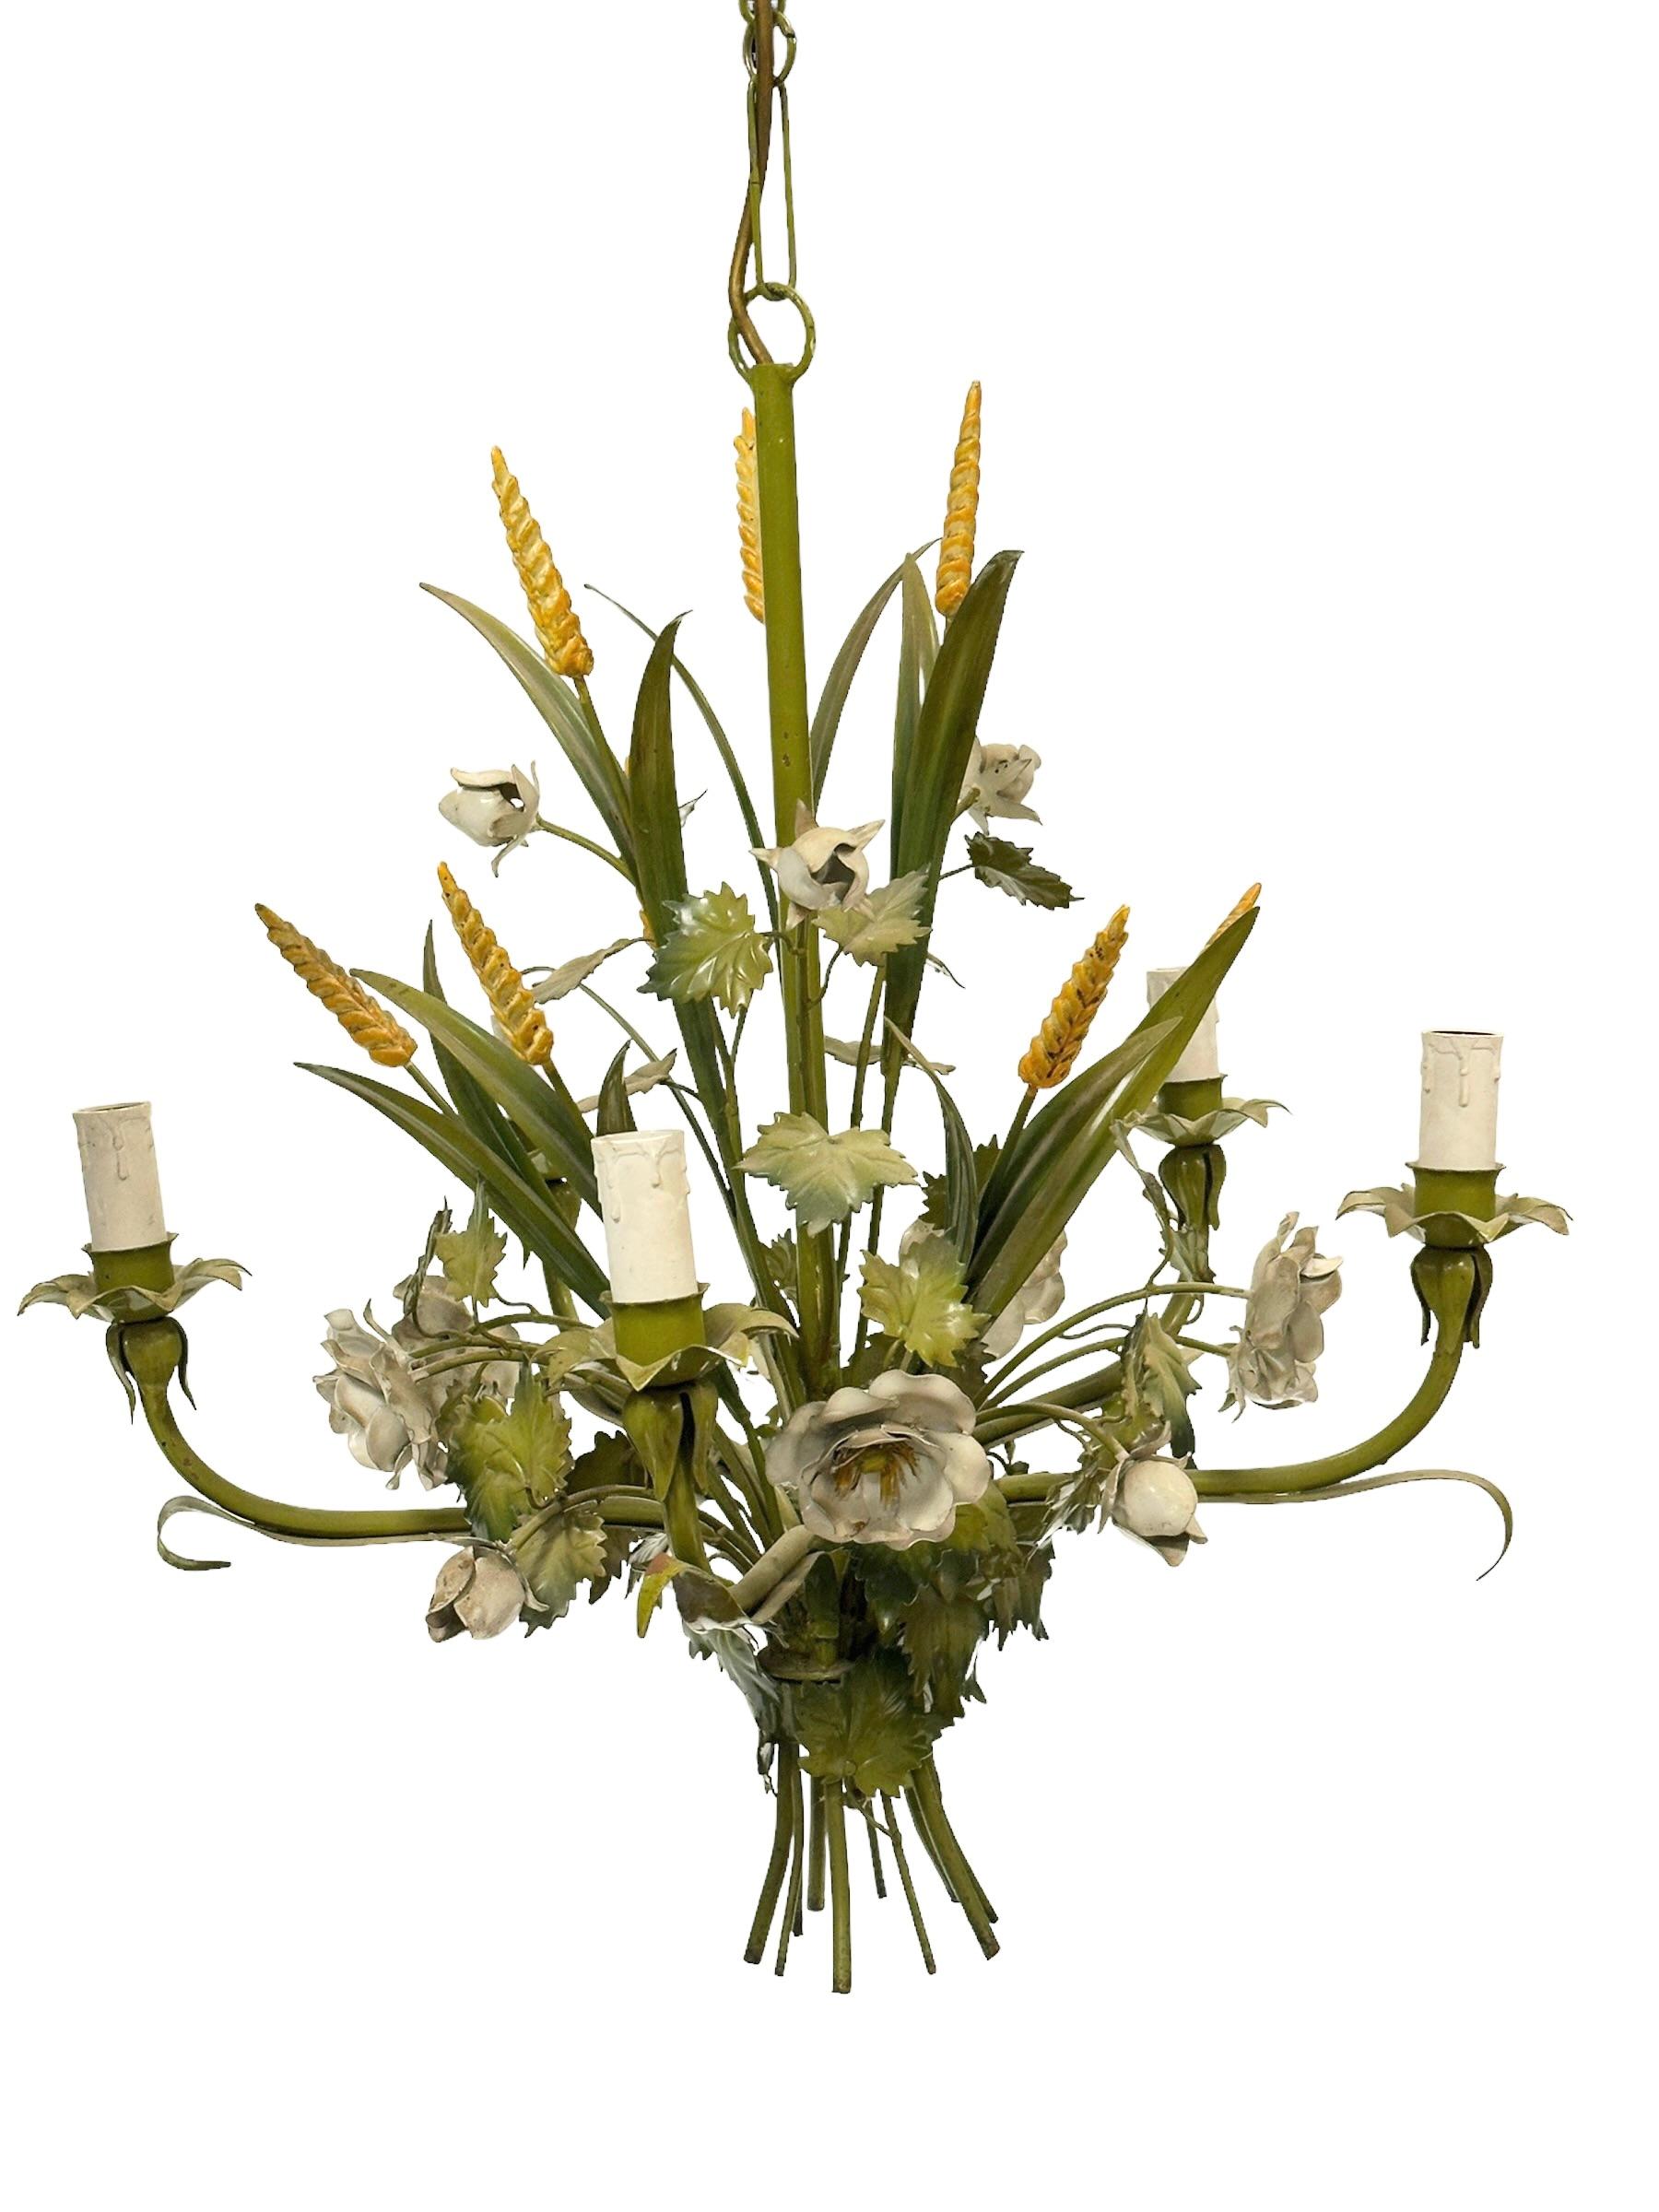 Petite Florentine style five-light chandelier. Functions as is with 5 E14 / 110 Volt light bulbs. Can take up to 40 Watts each bulb. Beautiful colored metal grasses, flowers and leaves chandelier. It gives a very warm light and represents the